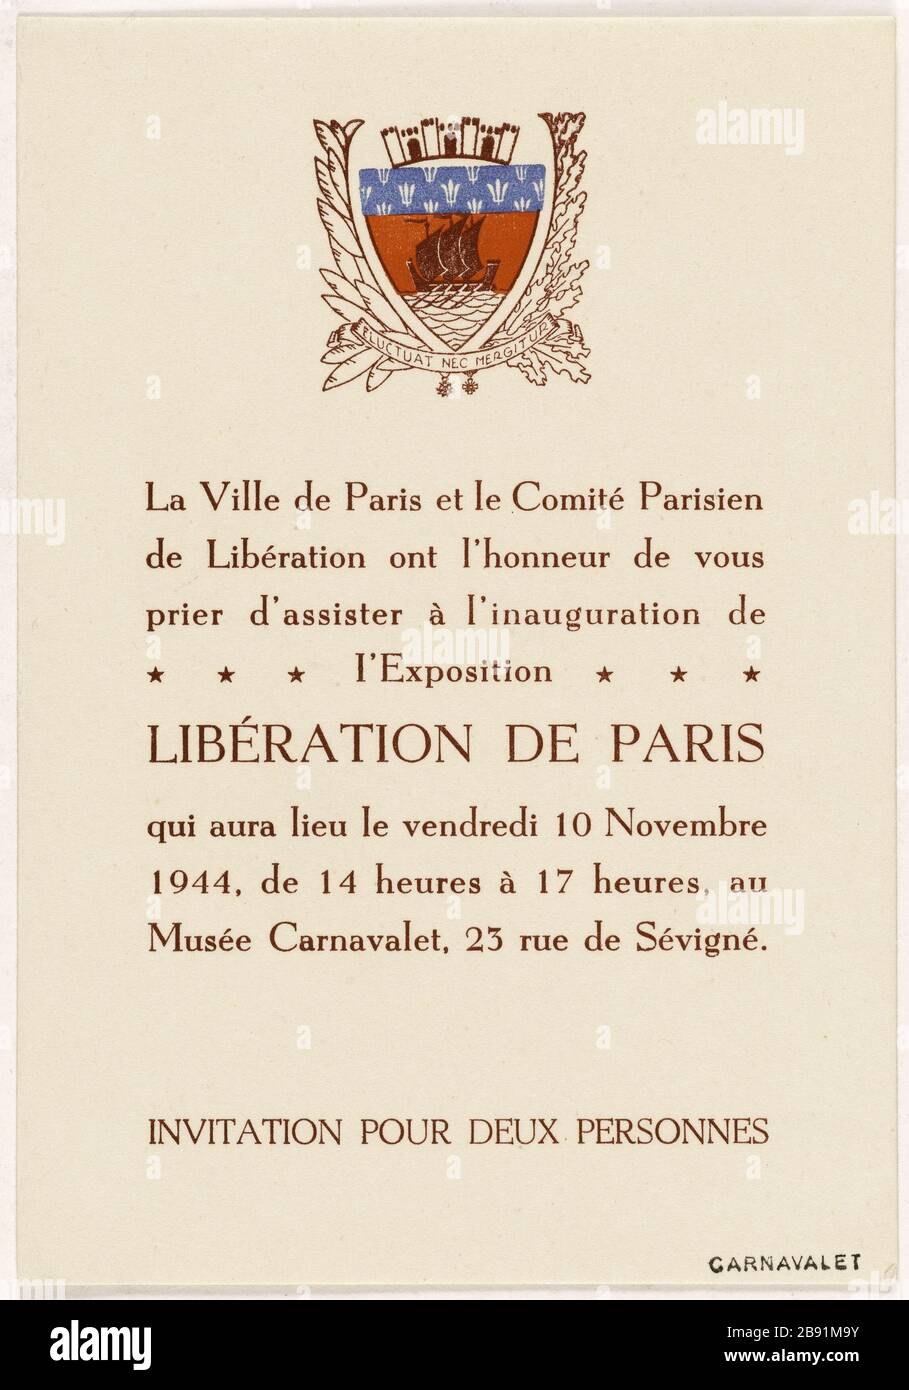 Invitation card for the exhibition of the Carnavalet museum opened November 10, 1944: 'The City of Paris and the Paris Liberation Committee has the honor to request you to attend the inauguration of the Exhibition RELEASE PARIS that will be held Friday, November 10, 1944, from 2:00 p.m. to 5:00 p.m., at the Musée Carnavalet, 23 rue de Sevigne. INVITATION fOR TWO Exposition 'LIBERATION DE PARIS'. Carton d'invitation pour l'exposition du musée Carnavalet, inaugurée le 10 novembre 1944. Paris, musée Carnavalet. Stock Photo